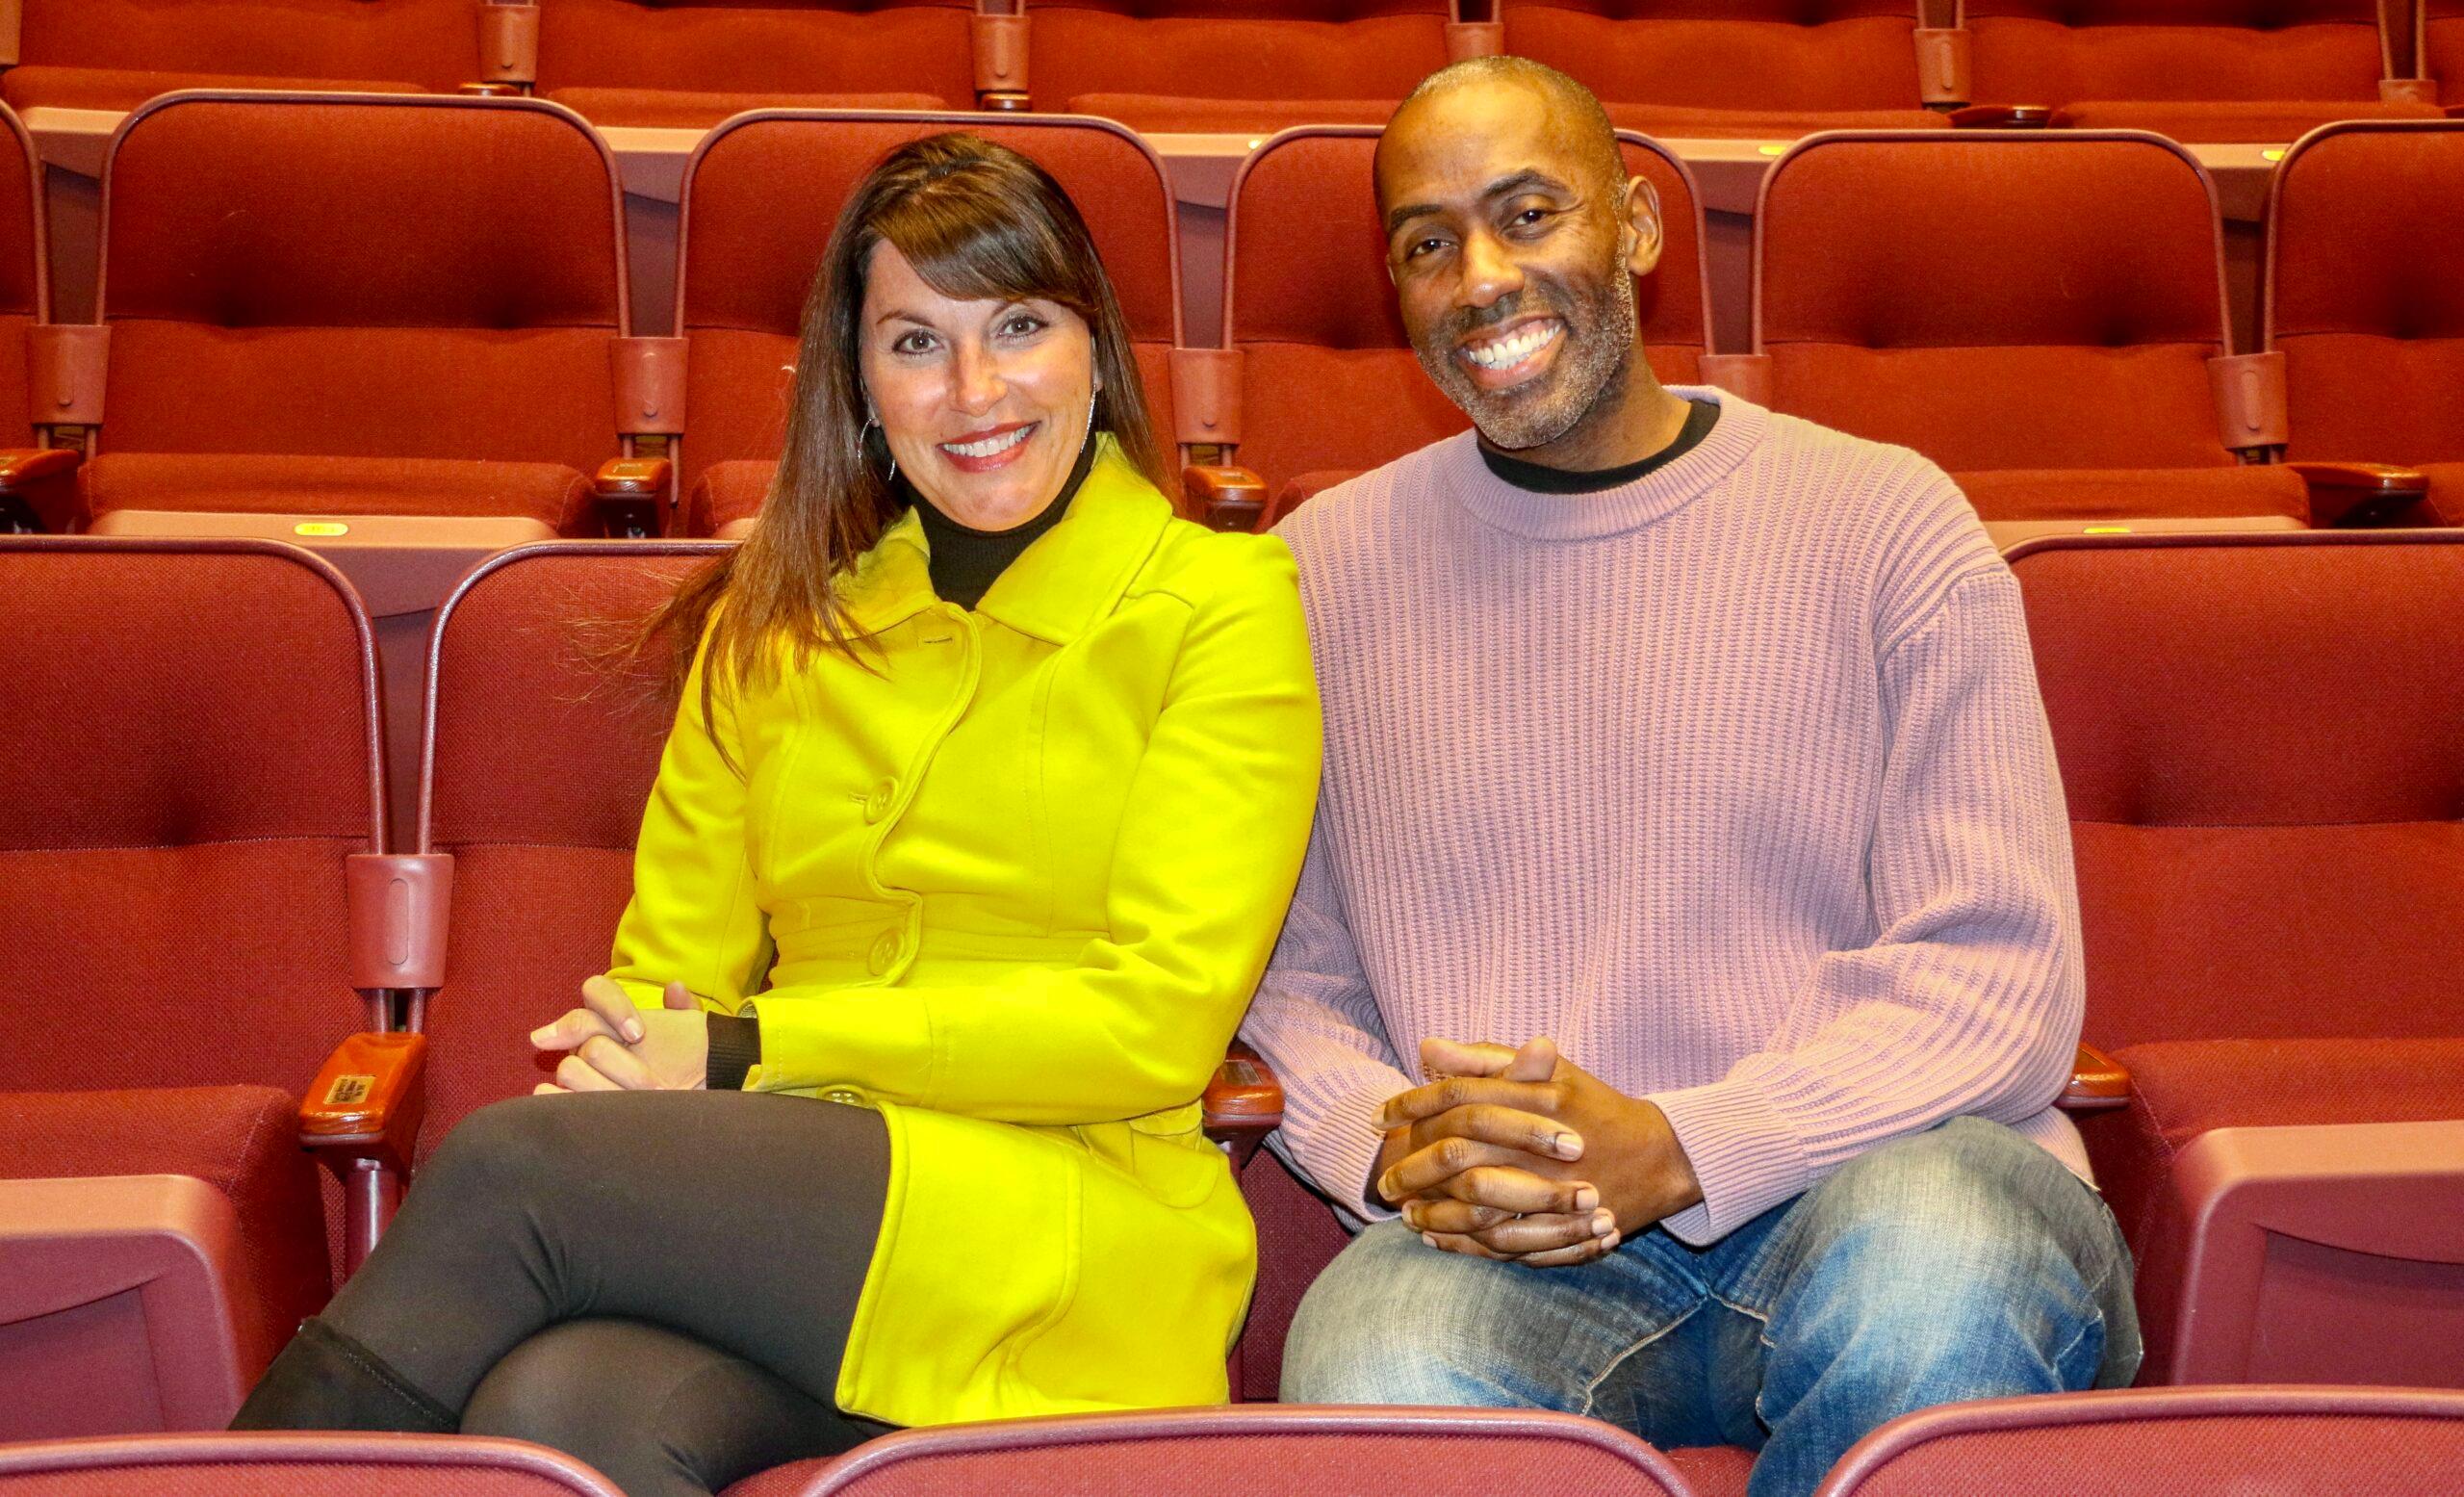 Ronni Stark and Kenny Moten, the new co-presidents of the Denver Actors Fund board, sit next to each other in red theater seats, smiling at the camera.